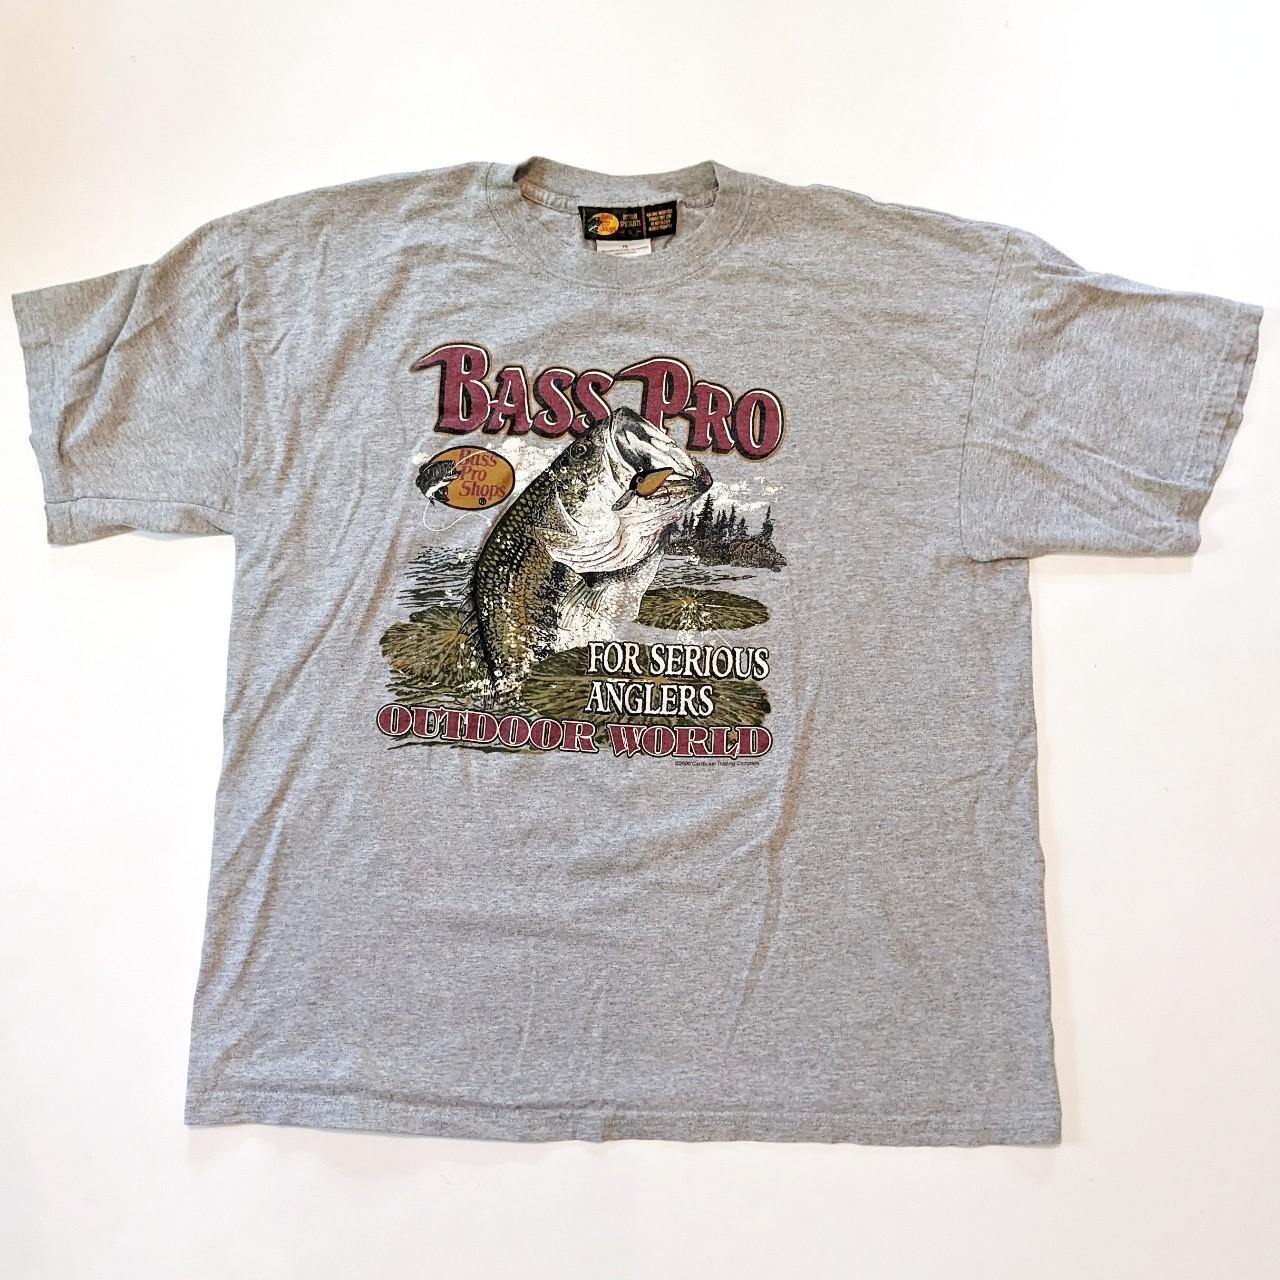 Vintage Bass Pro Shop fishing graphic t-shirt in a